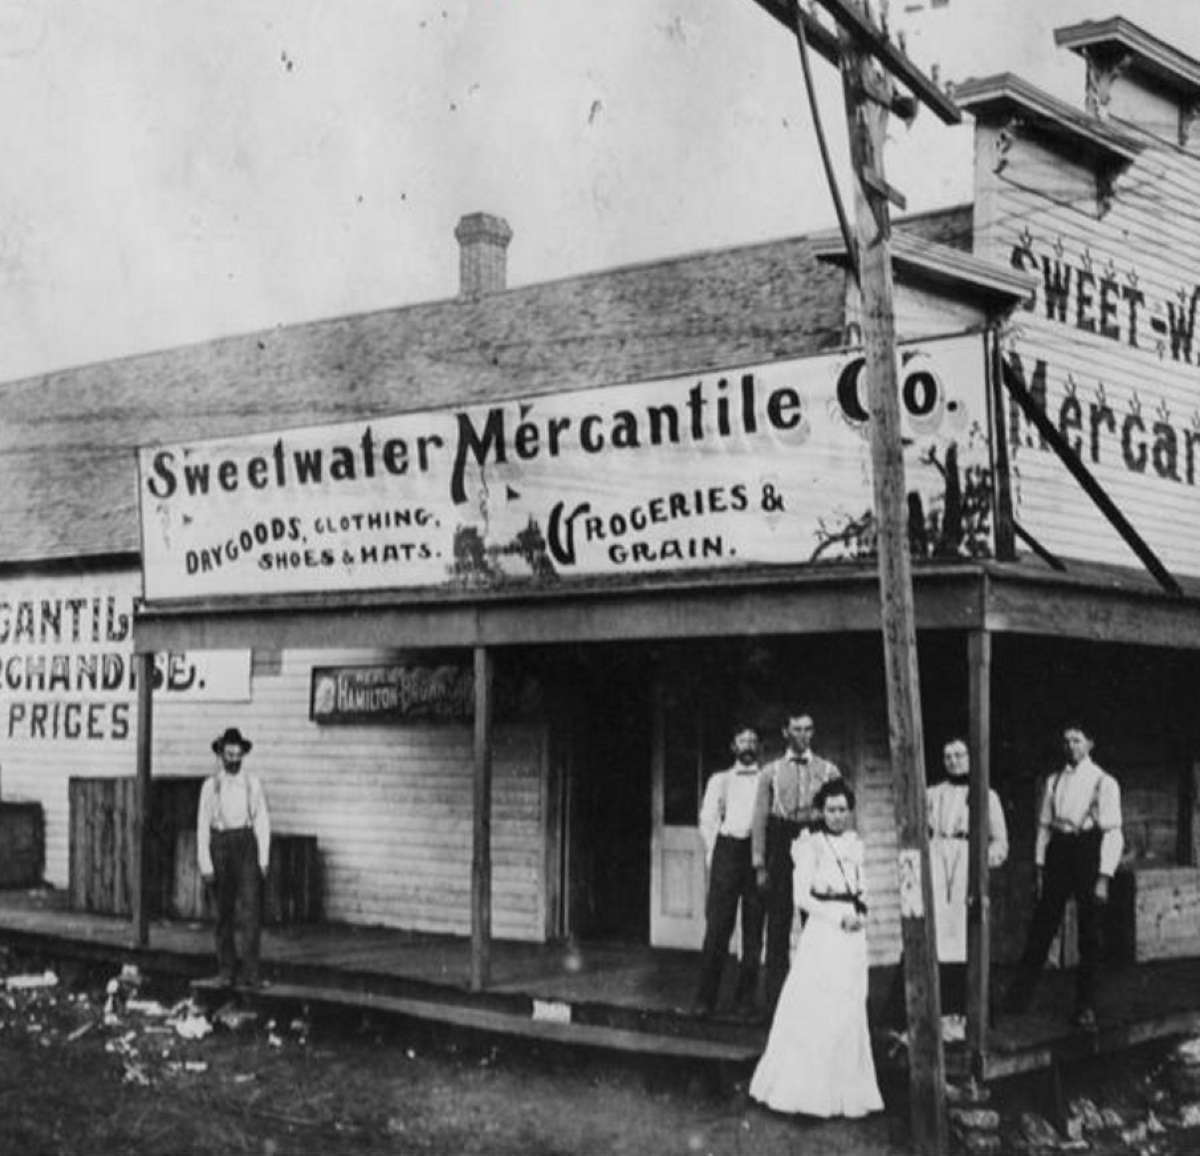 Sweetwater Mercantile in Early 1900s